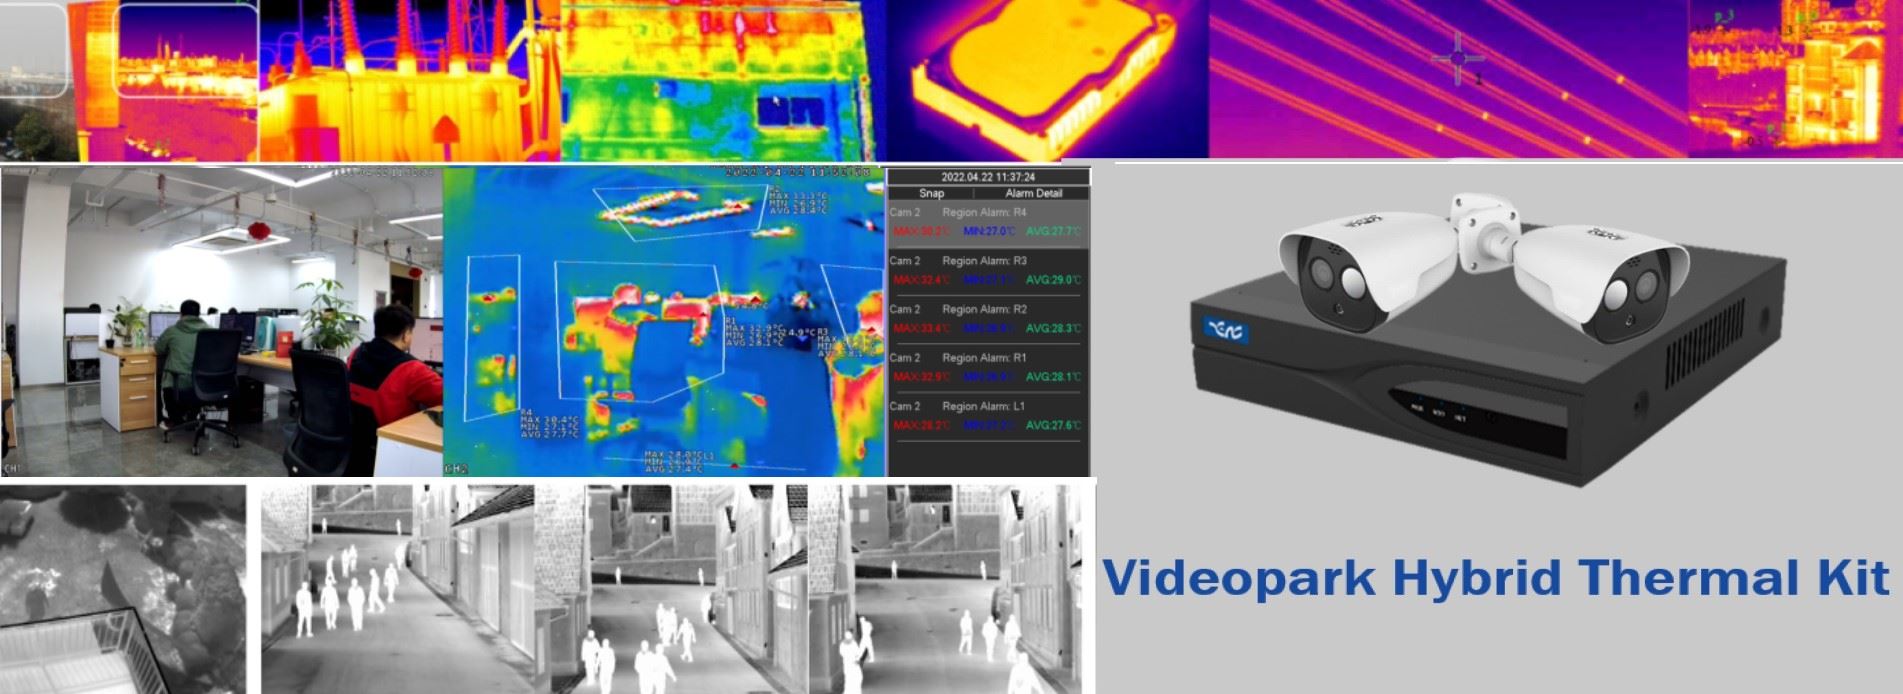 Hybrid thermal kit-visual image and thermal image with temperature